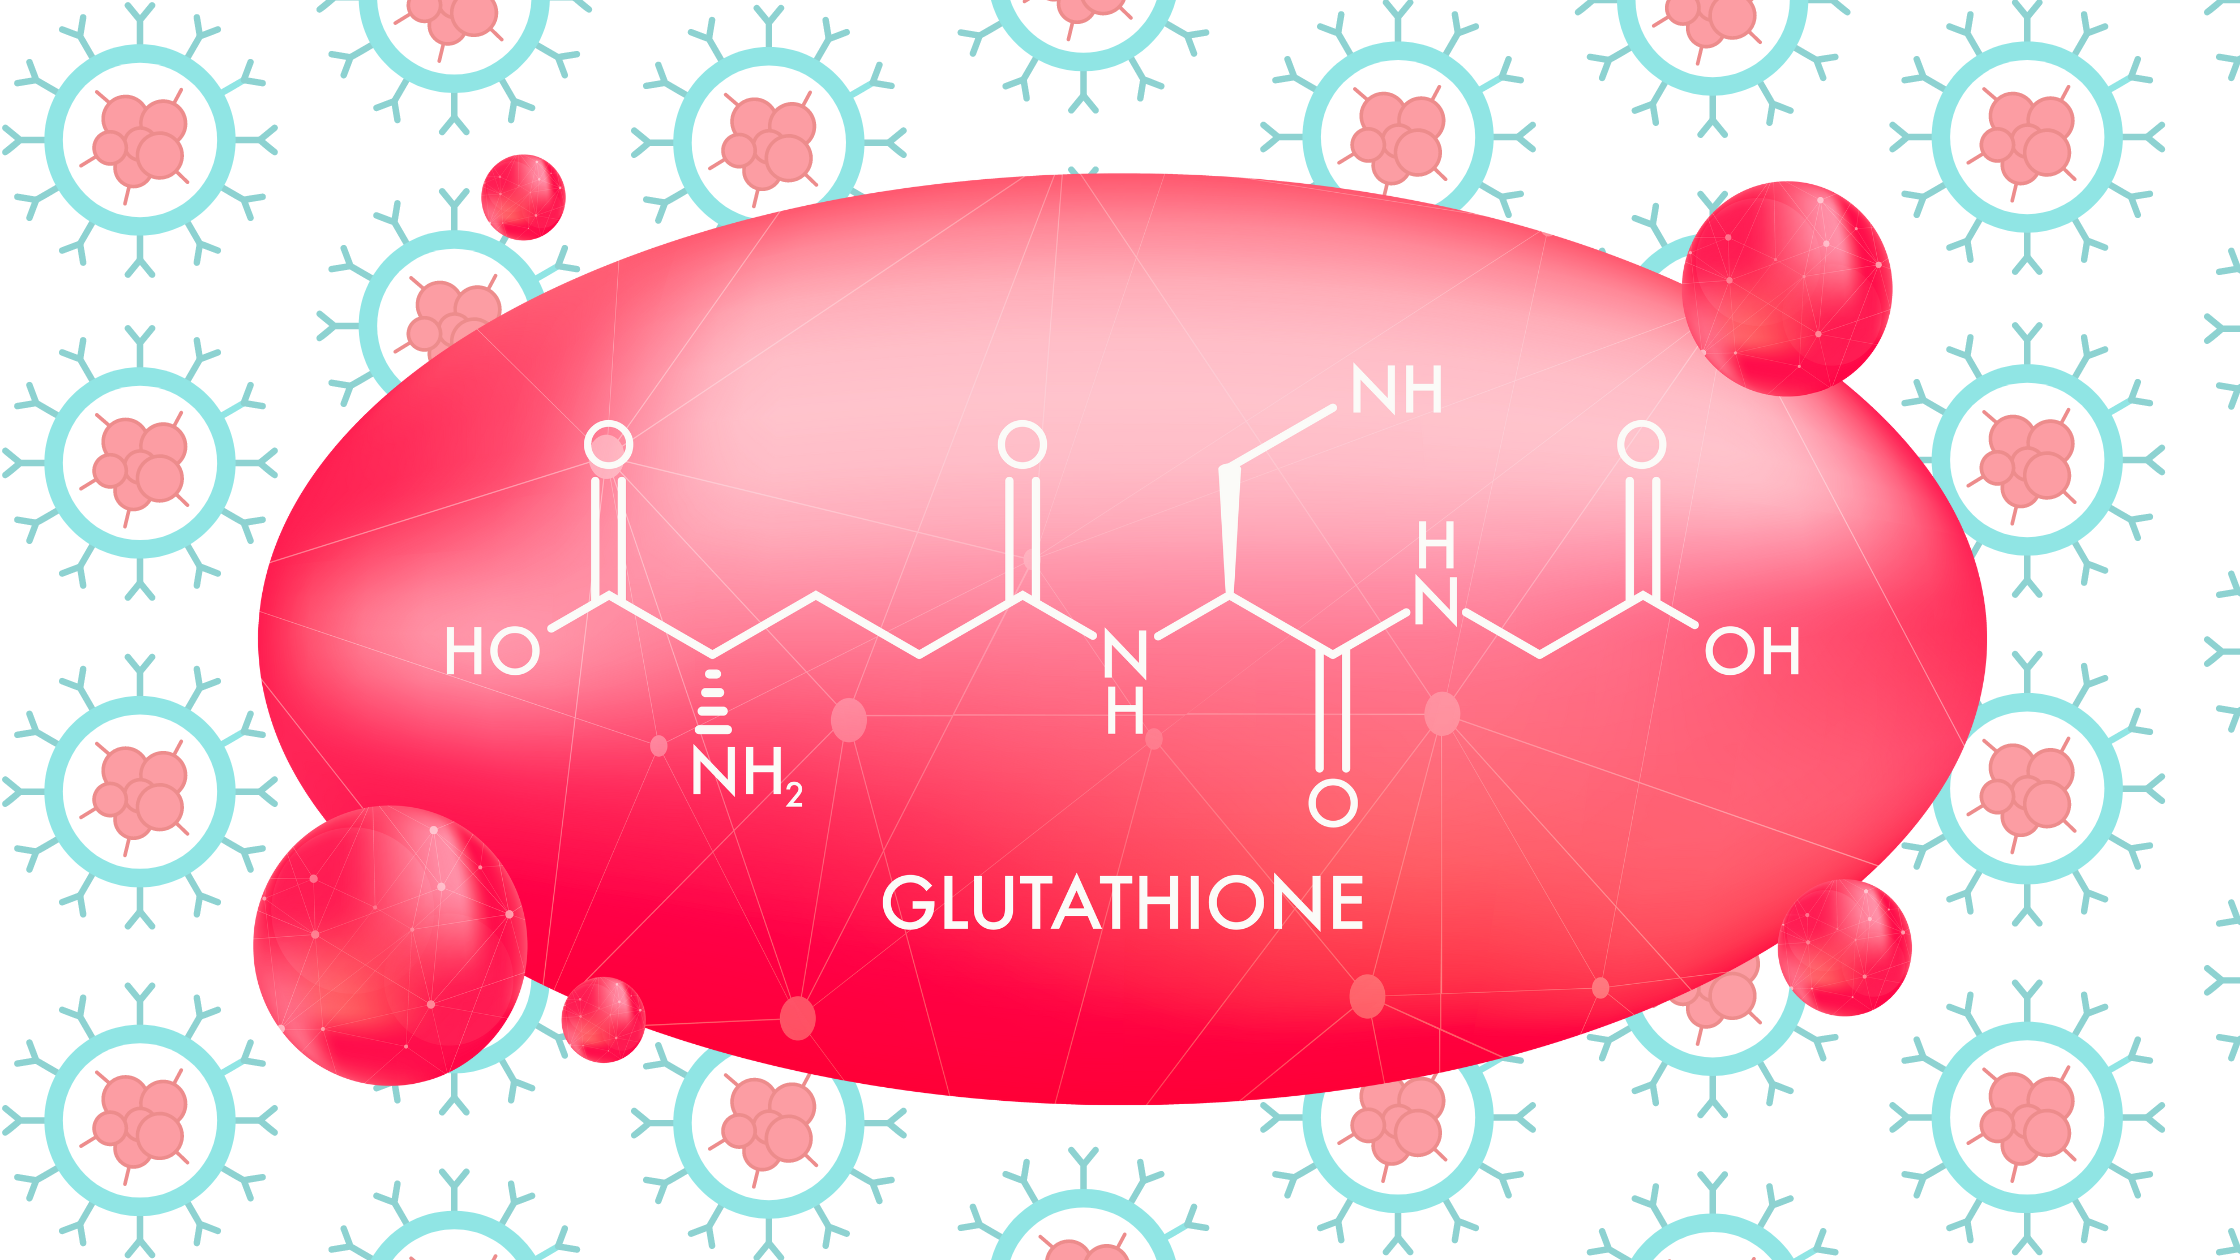 Does Glutathione Cause Cancer?